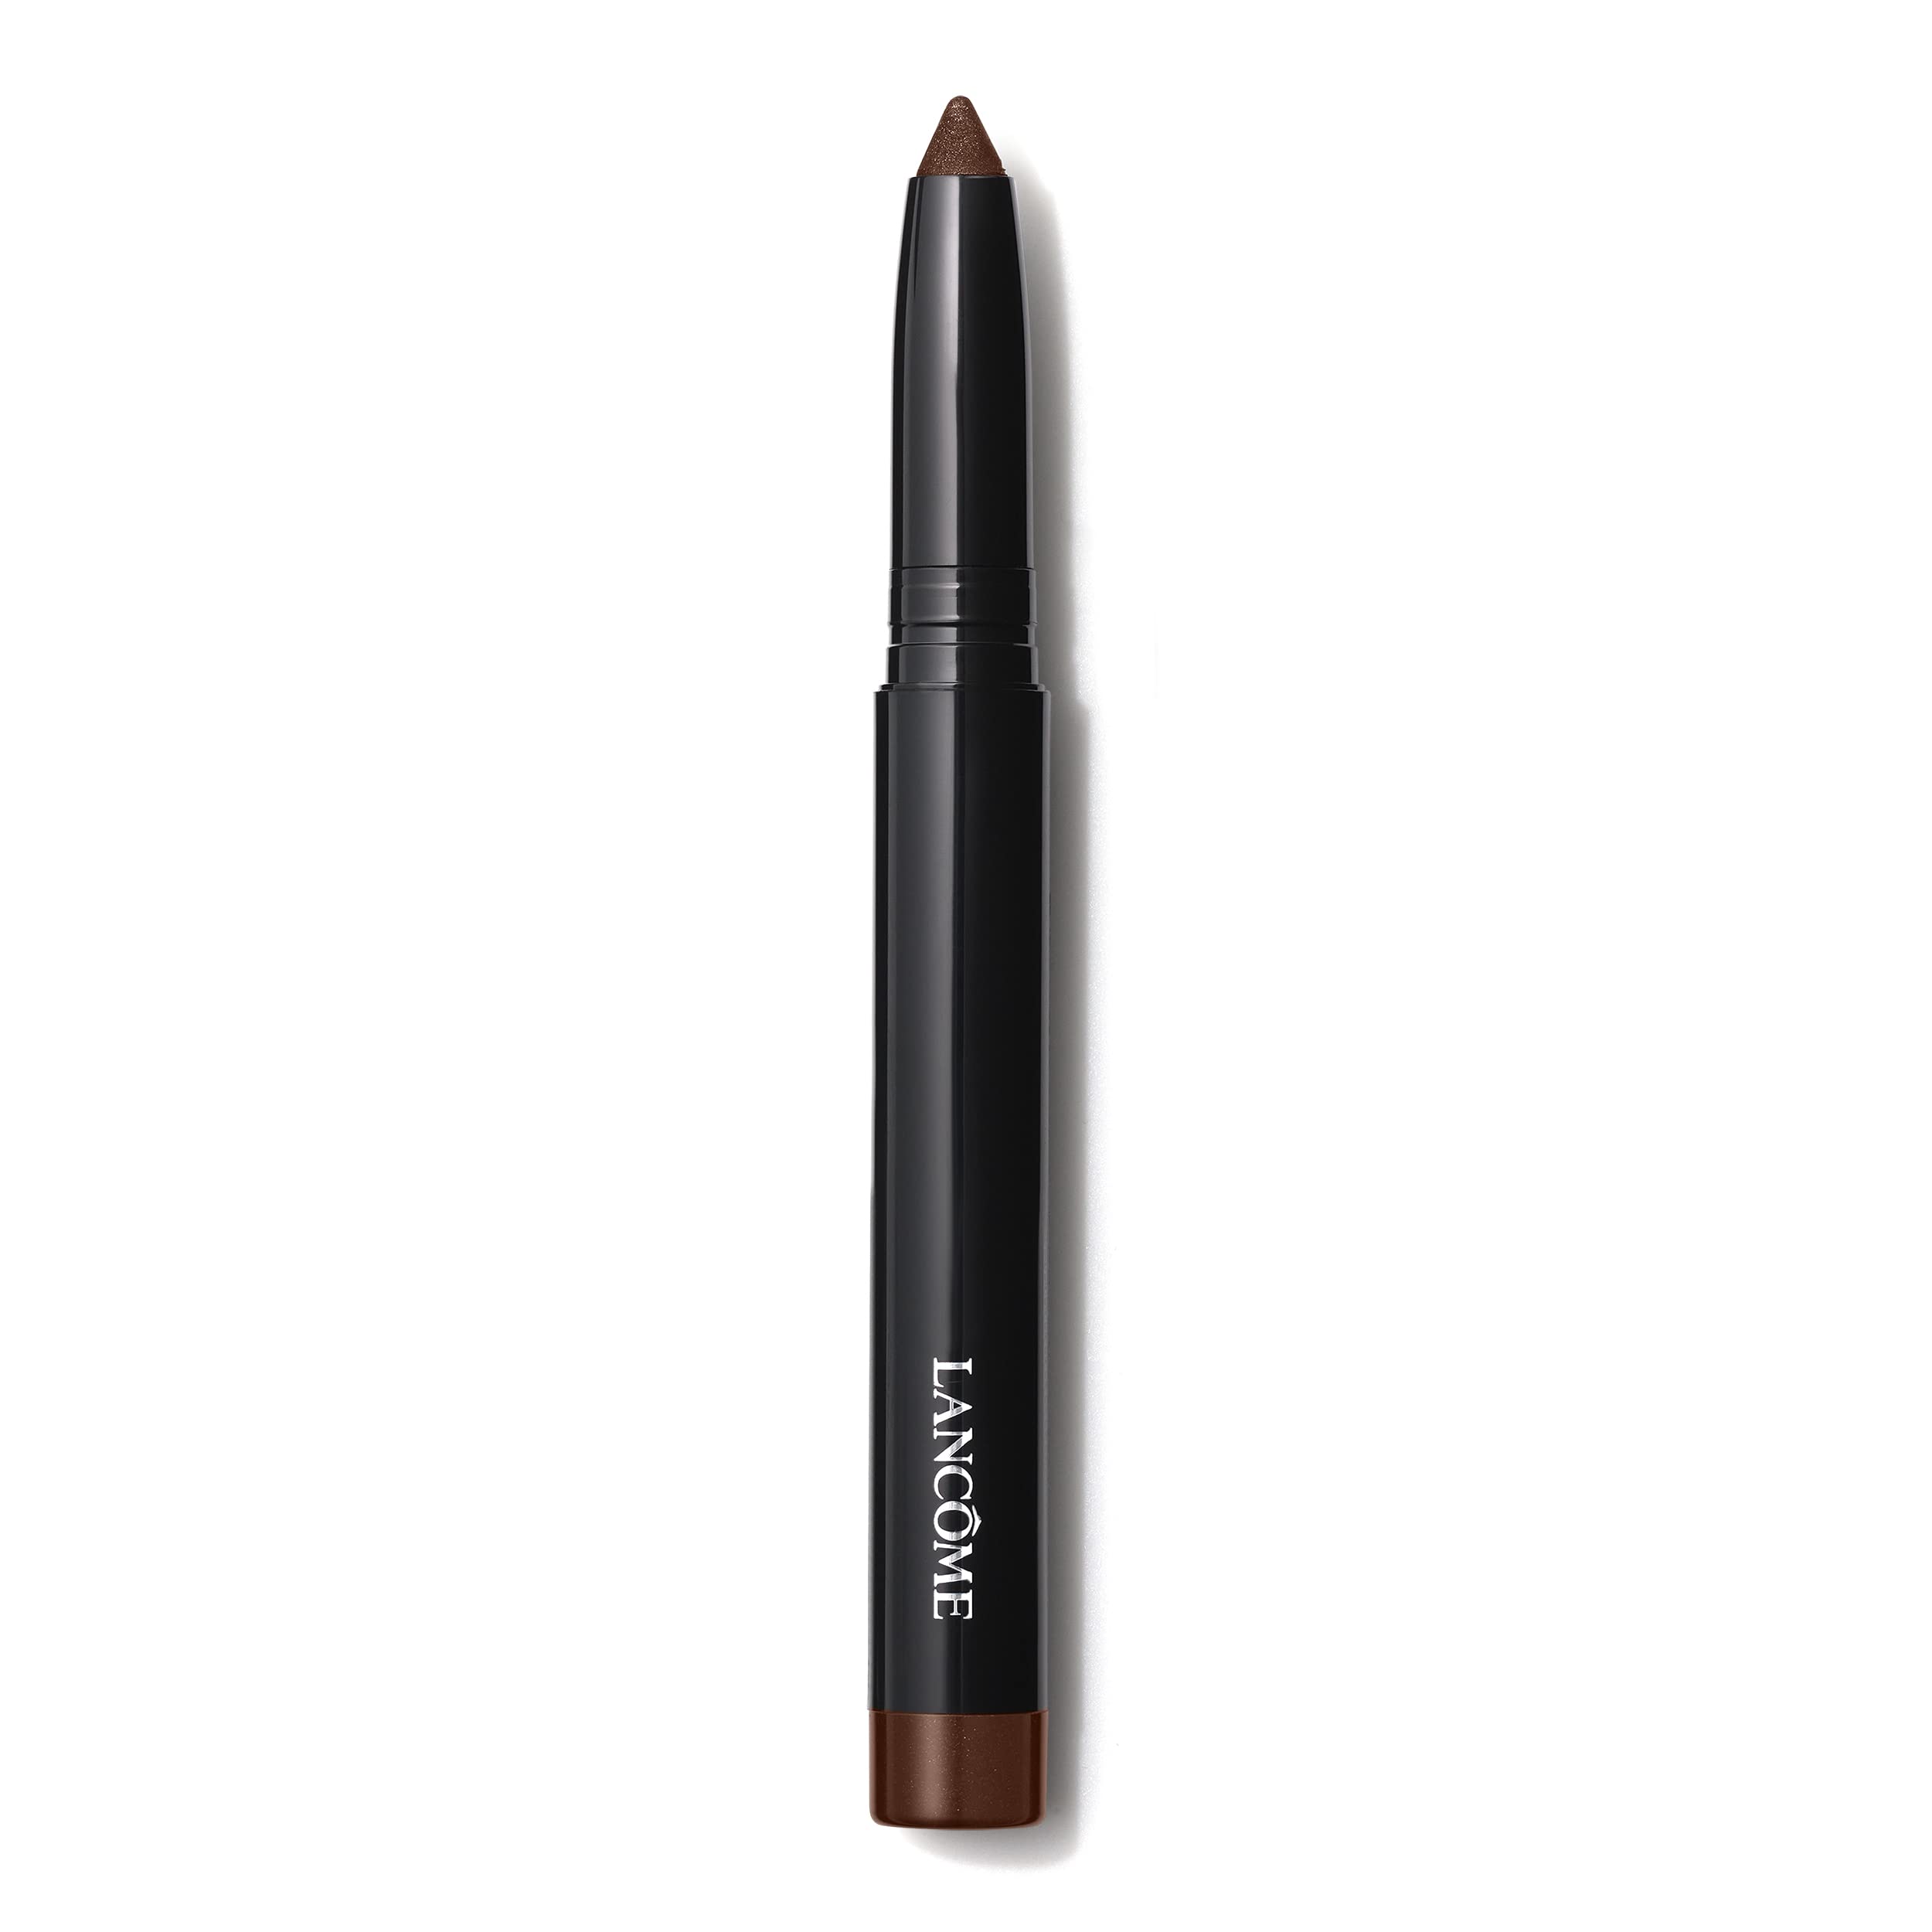 Lancôme Ombre Hypnôse Stylo Eyeshadow Stick - Ultra-Creamy & Highly Pigmented - Up To 24H Waterproof Formula - 27 Bronze